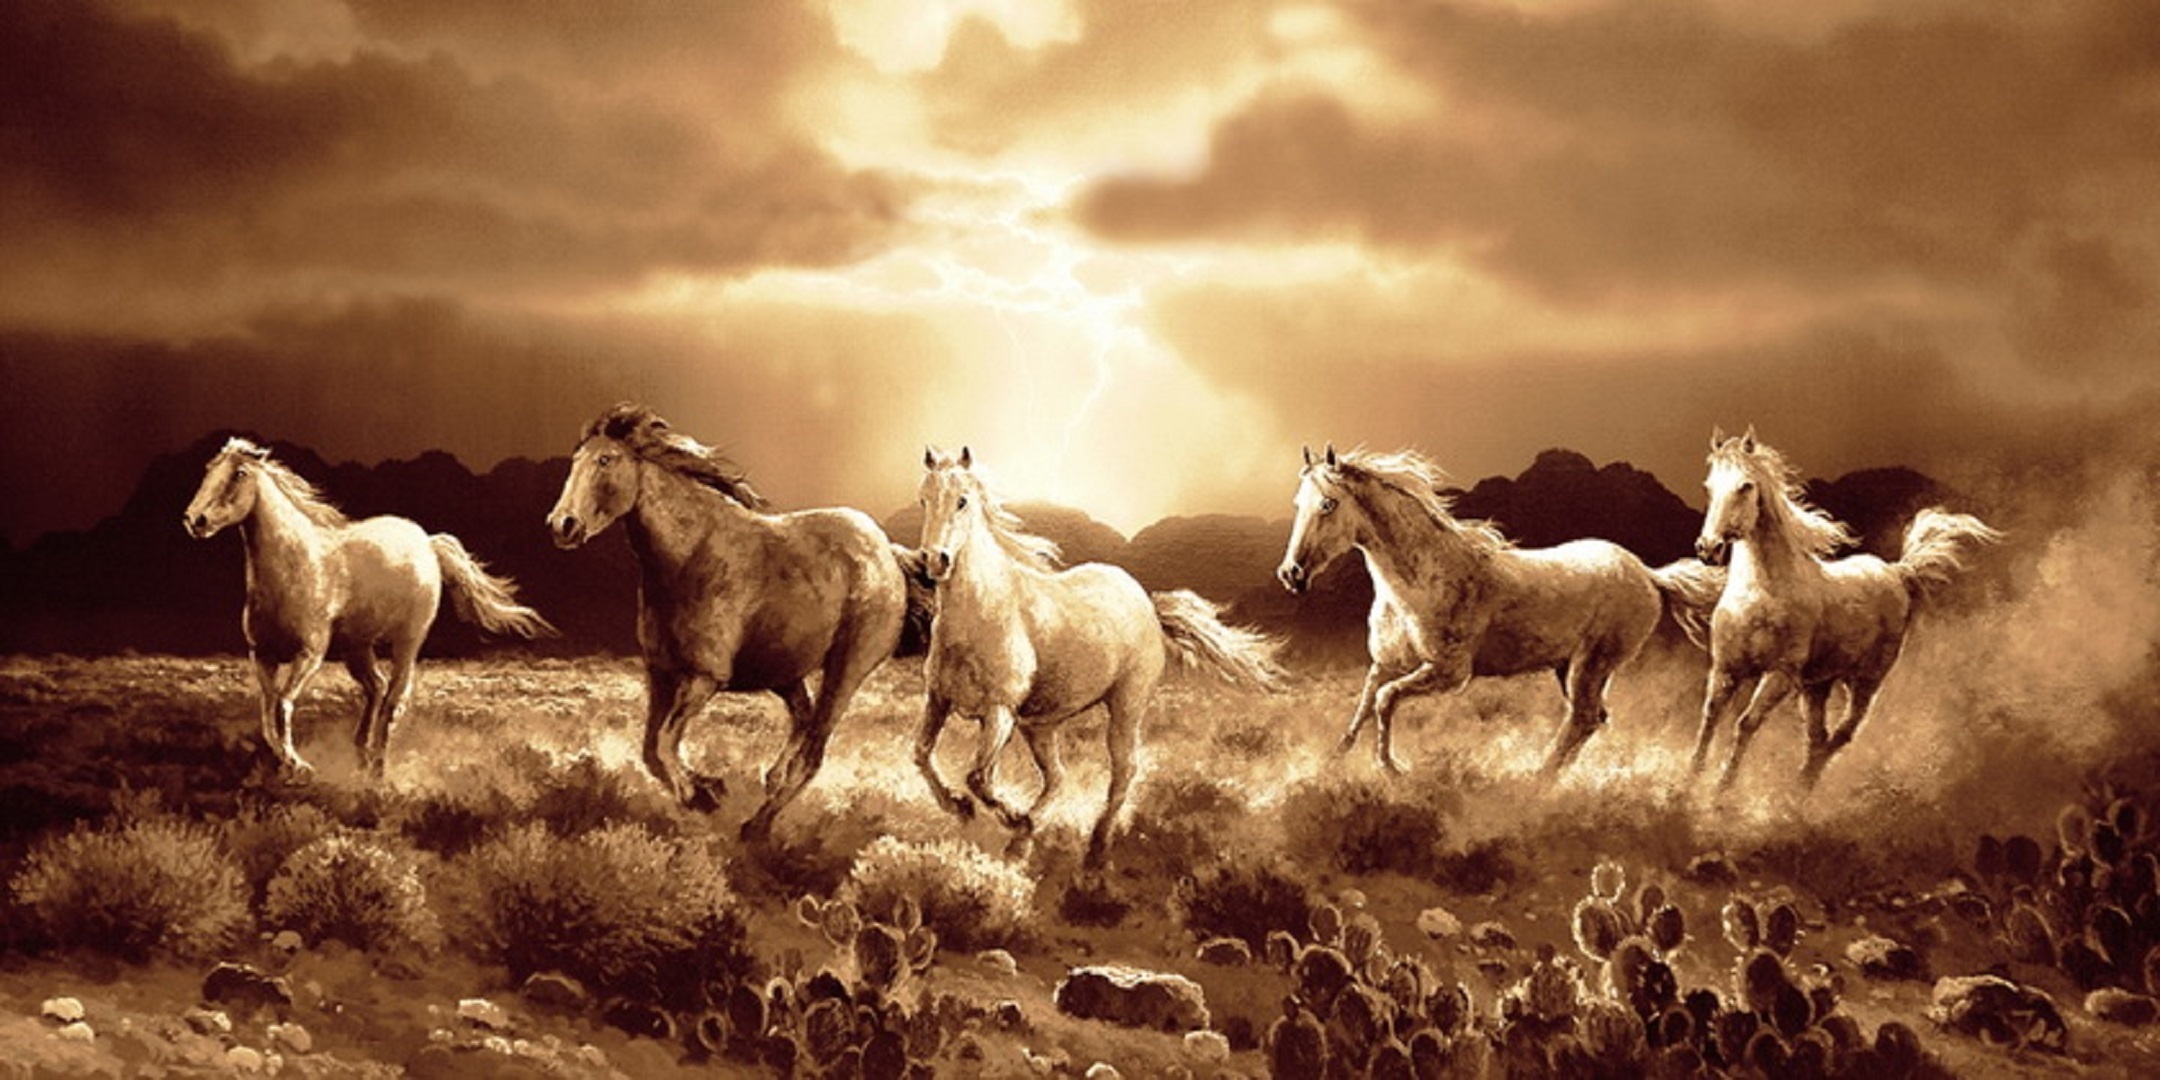 Wallpaper | Beautiful pictures | photo | picture | American landscapes, a  herd of horses in the desert, artist James Lee